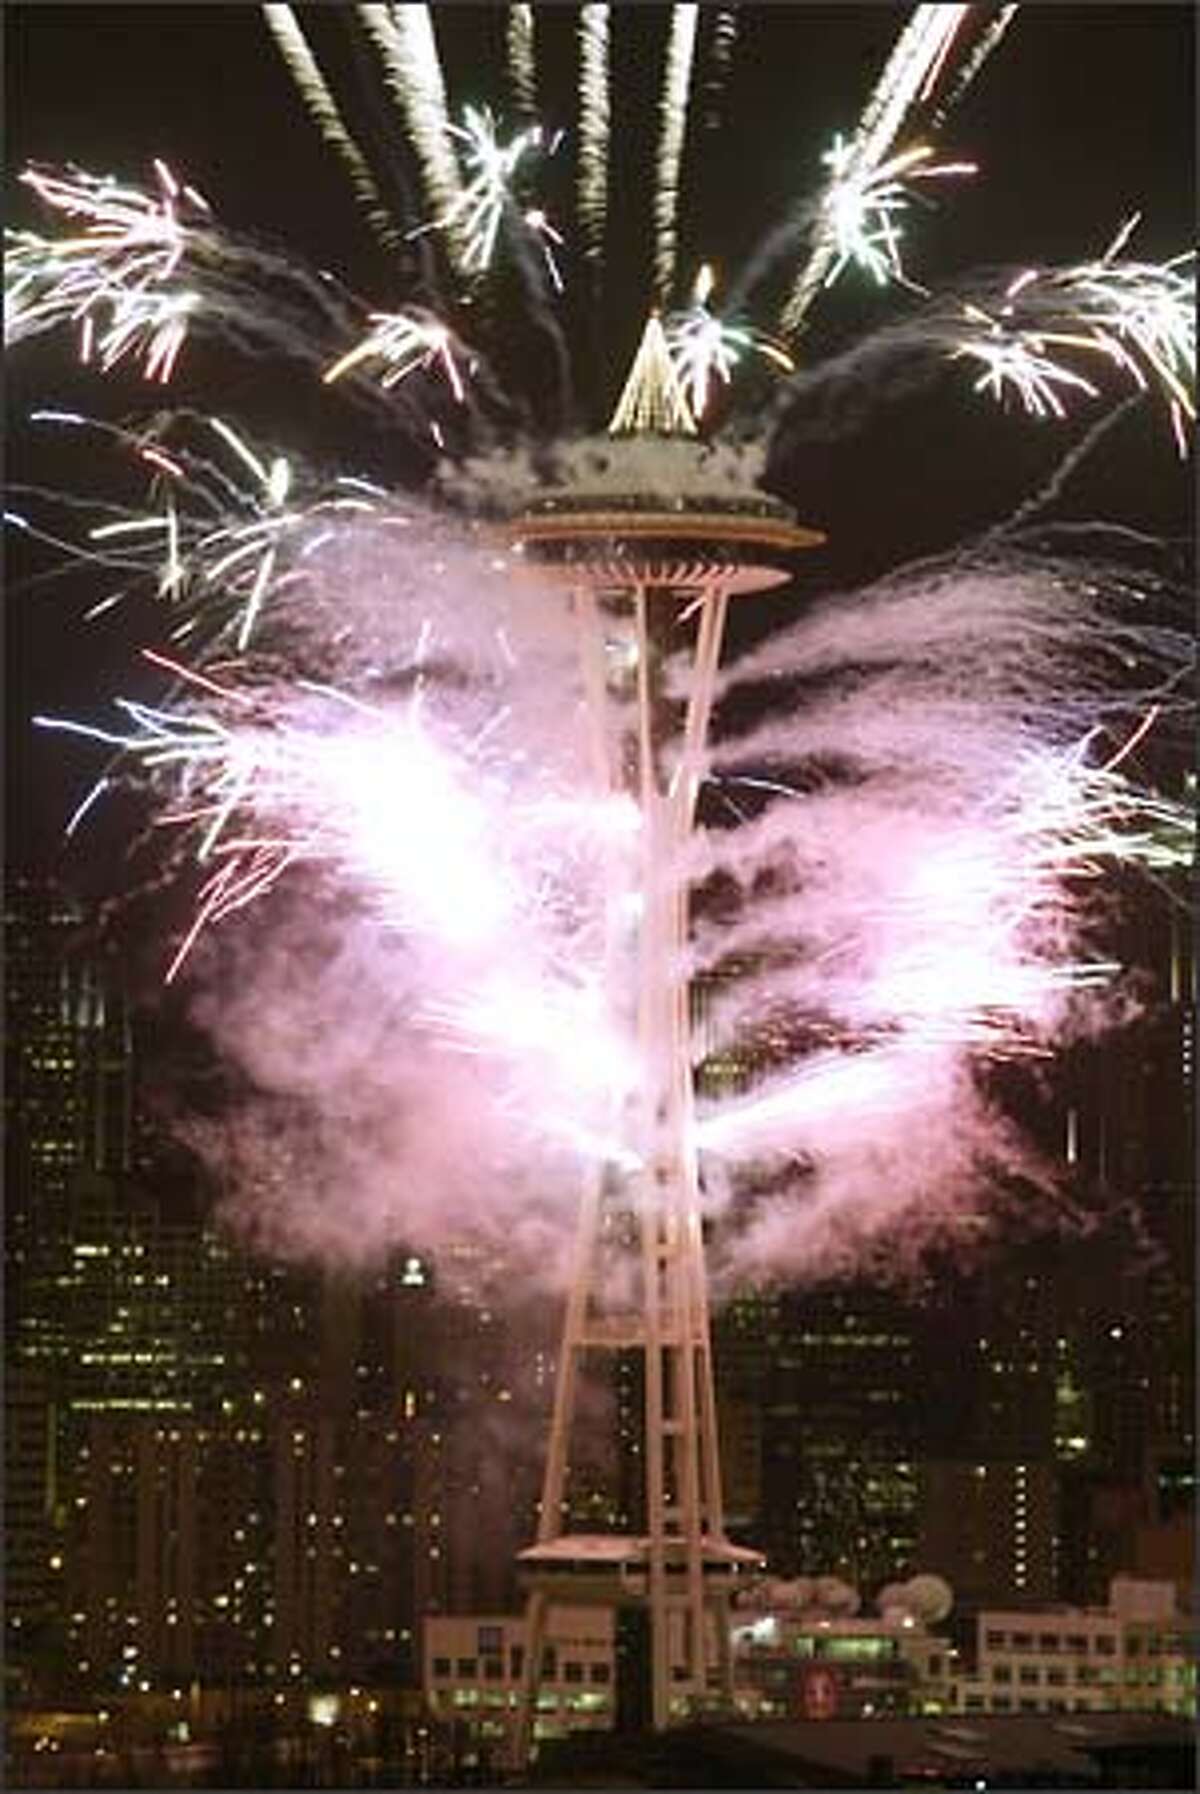 Last night's fireworks spectacular at the Seattle Center's Space Needle impressed thousands gathered below.